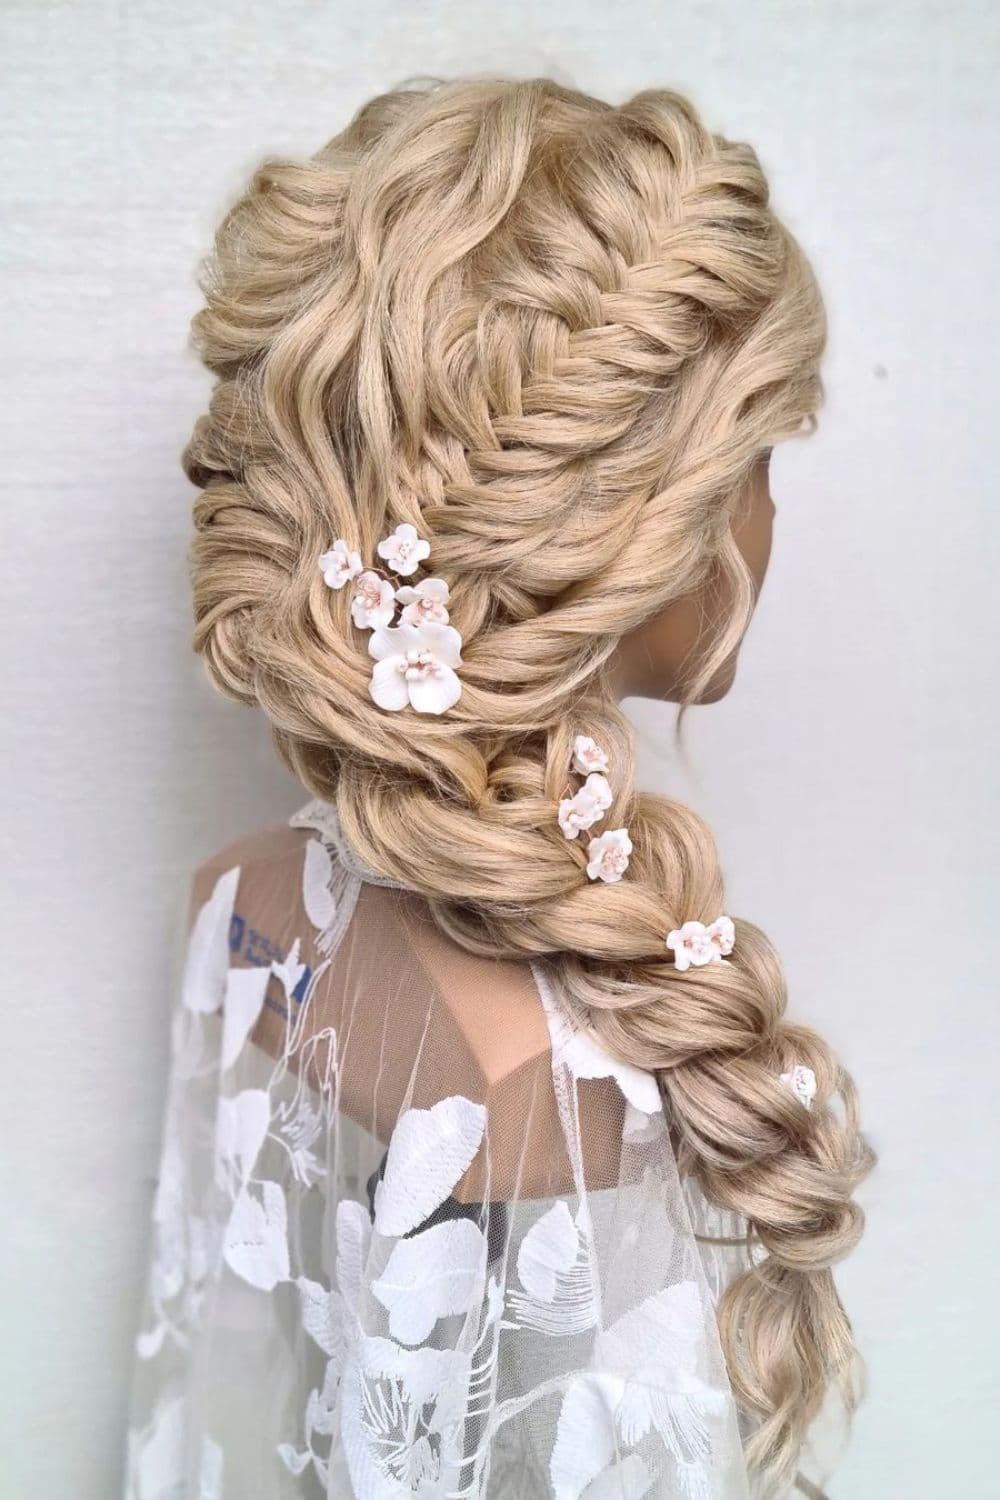 Side view of a mannequin with a sleek side French fishtail braid with flower accessories.